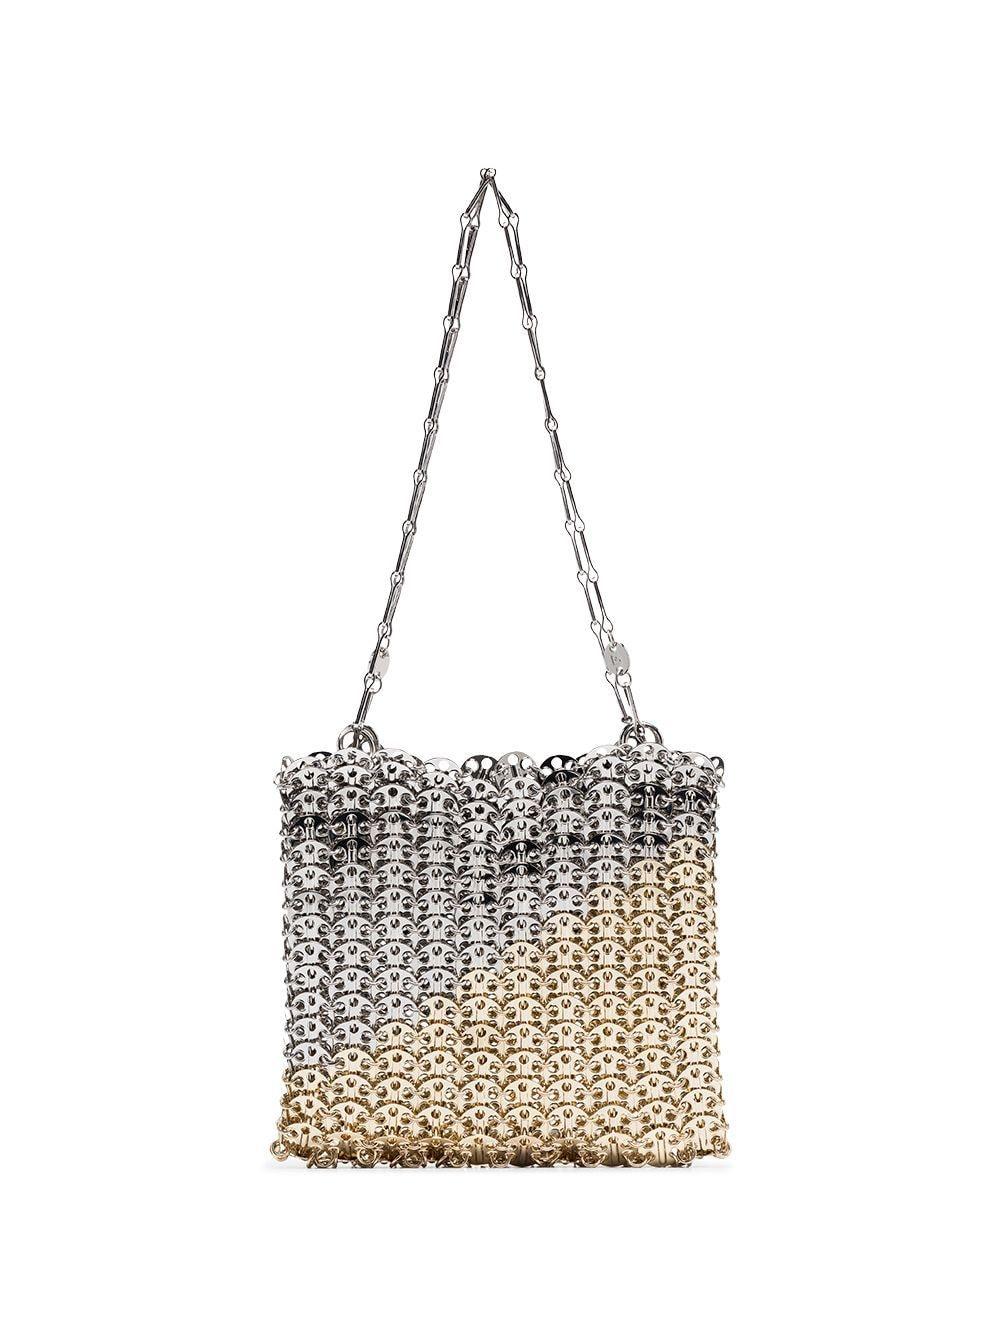 Paco Rabanne Iconic 1969 Shoulder Bag in Gold (Metallic) - Save 12% - Lyst